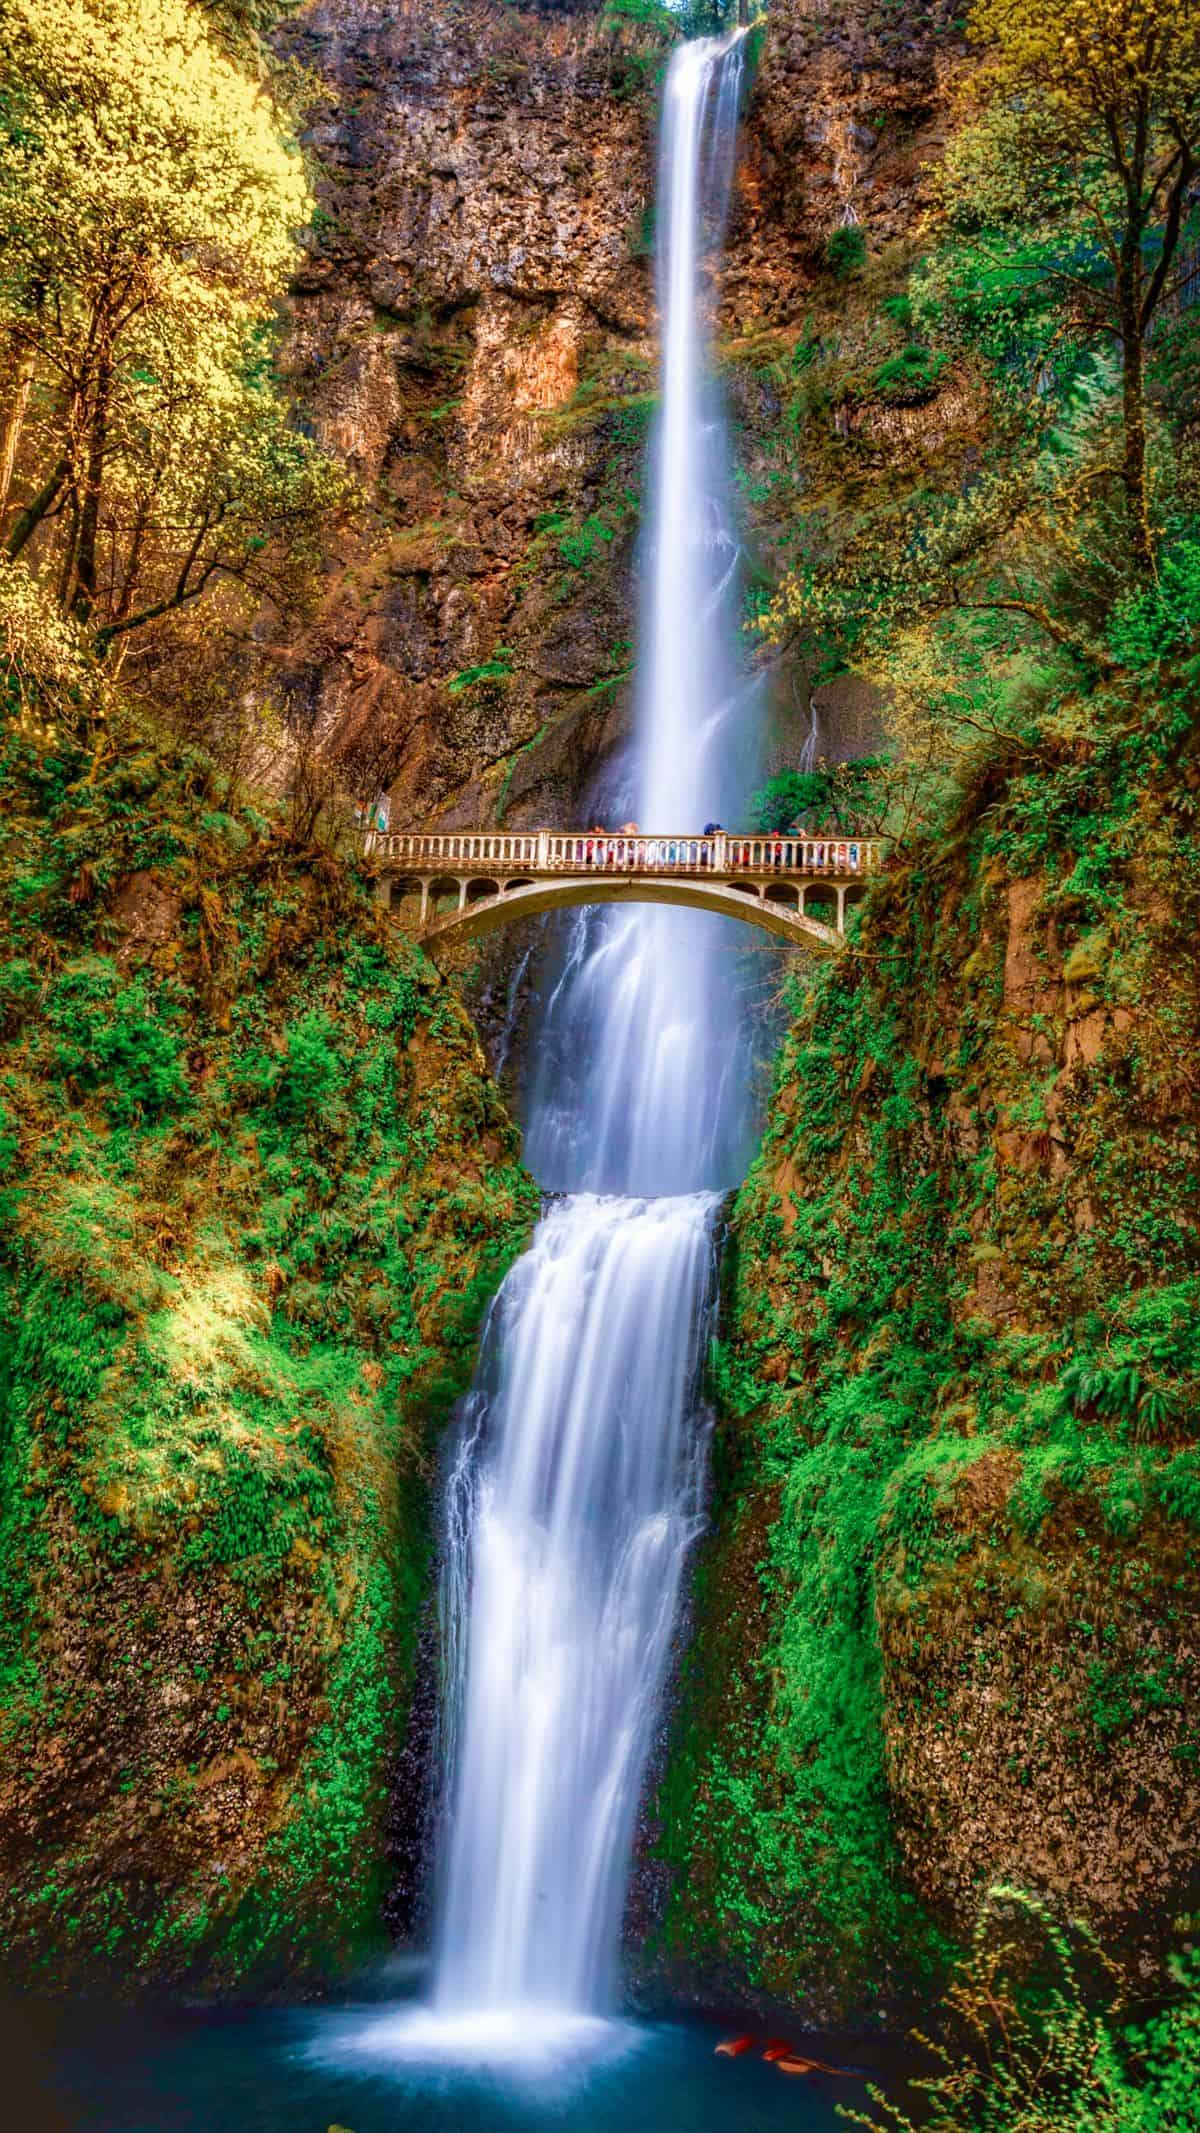 Multnomah Falls is a popular photo spot in Oregon, and rightfully so!